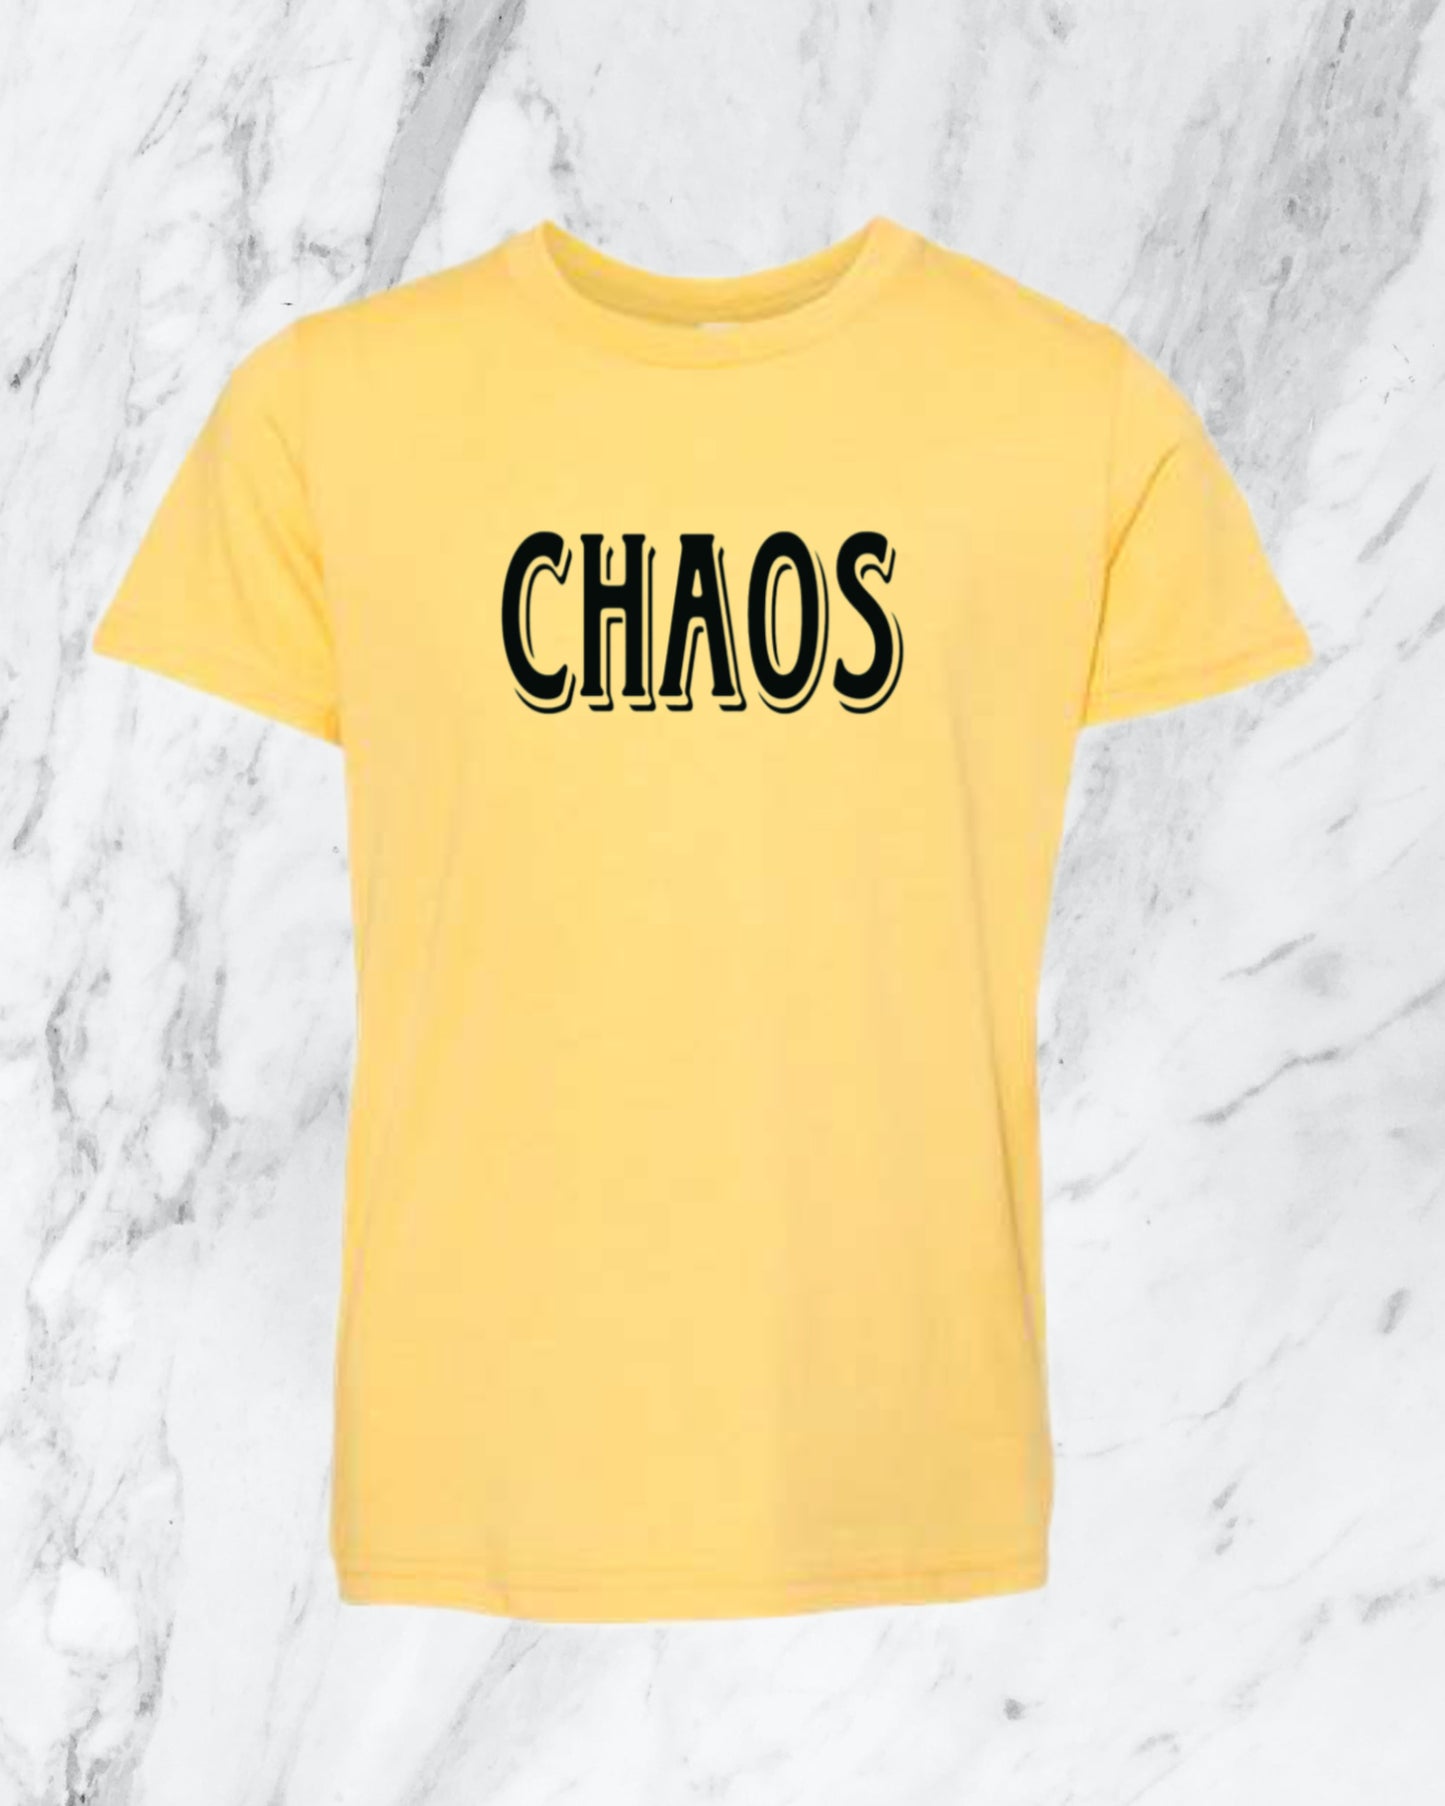 Toddler/Youth CHAOS yellow